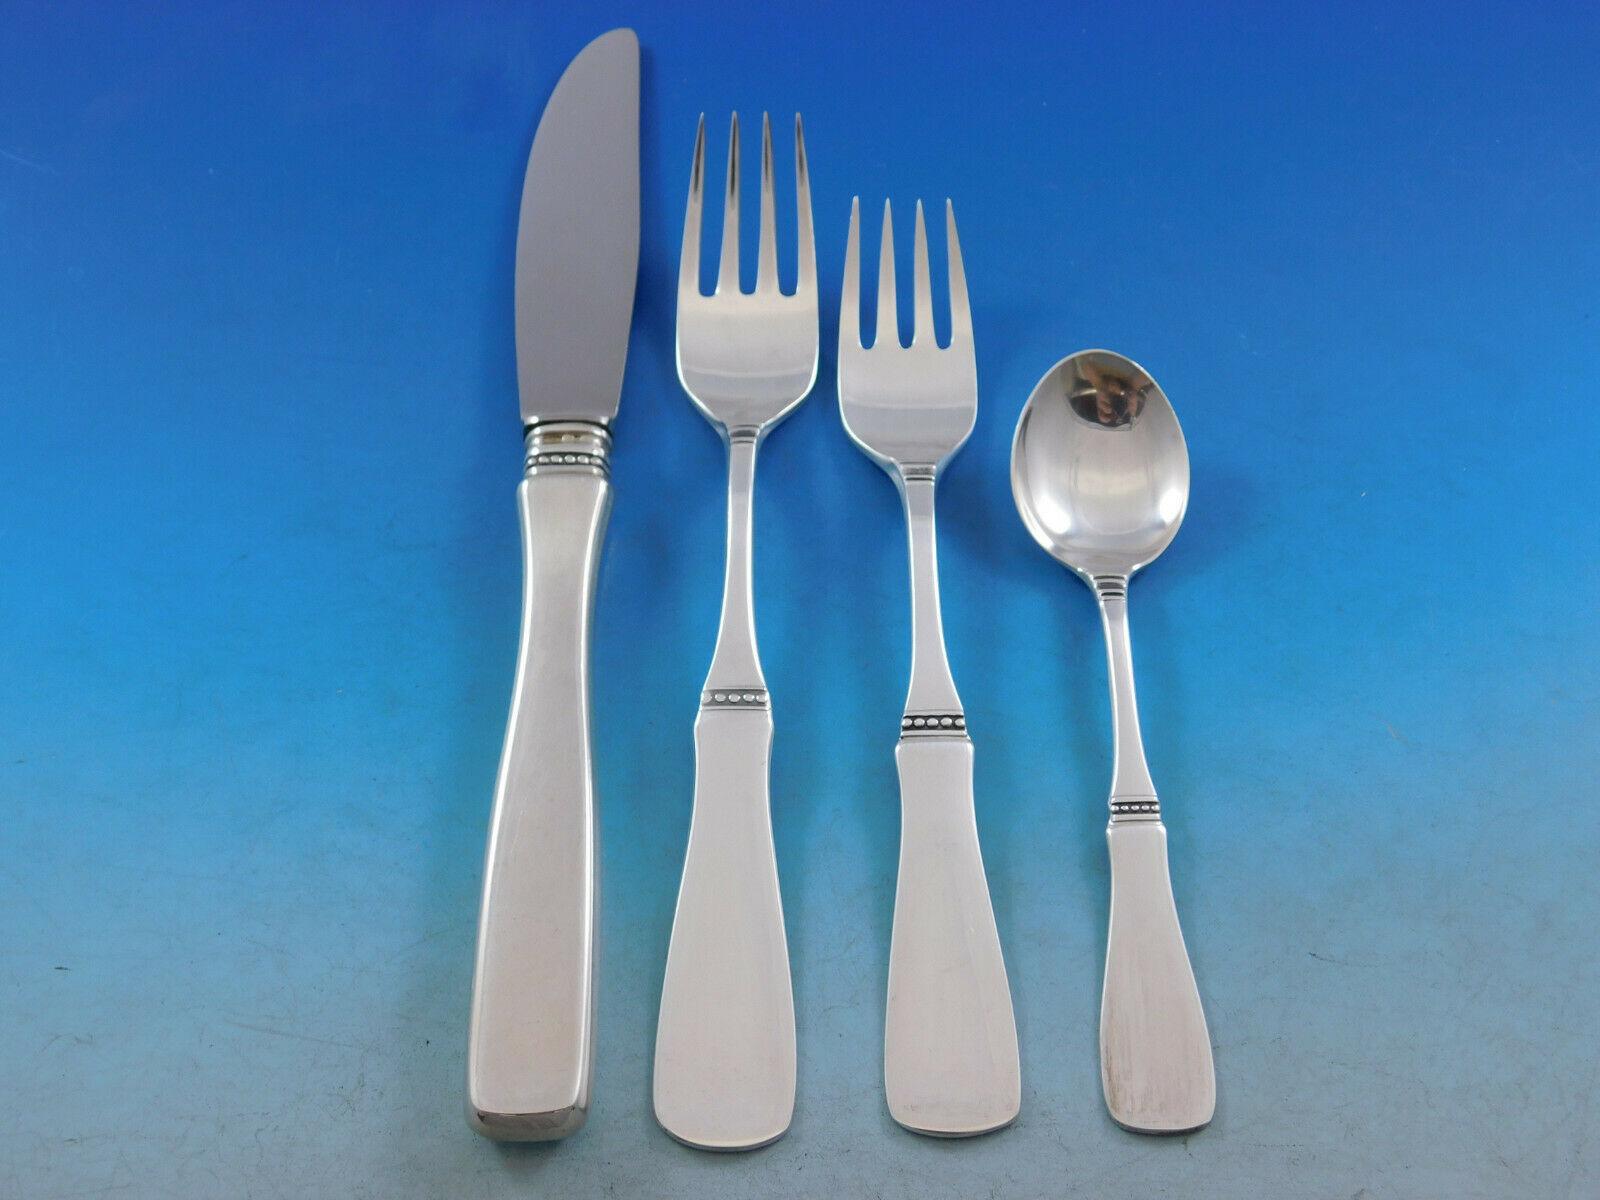 Lovely Uppsala by Mema, designed by Eric Lofman, Swedish 830 Silver Flatware set with bead detailing - 96 pieces. This set includes:


12 Knives w/stainless blades, 8 3/8